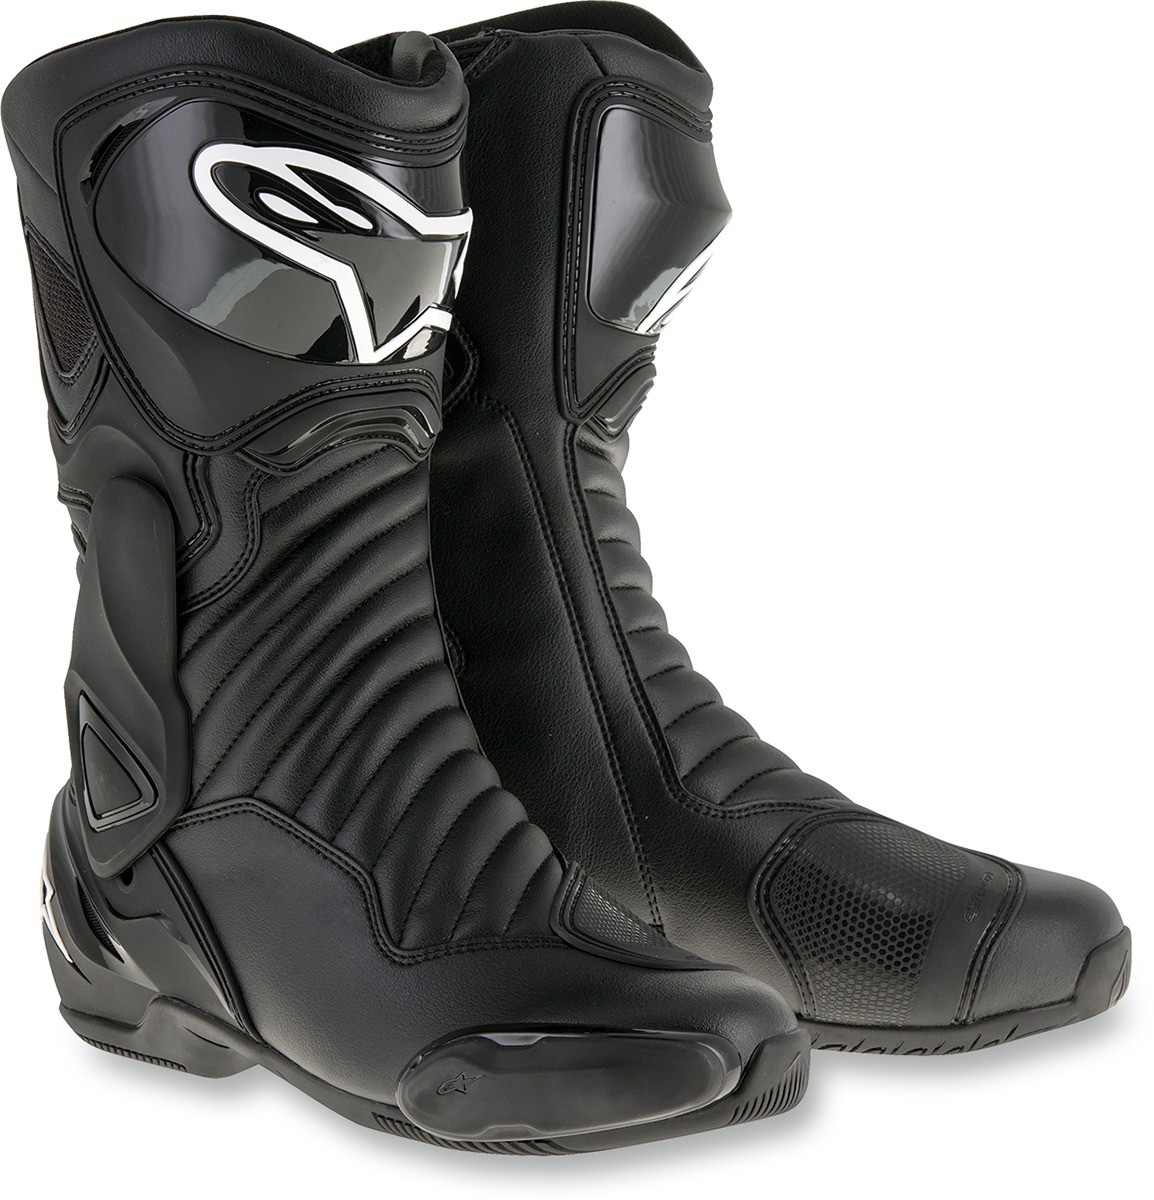 SMX-6 V2 Street Riding Boots Black US 5 - Click Image to Close